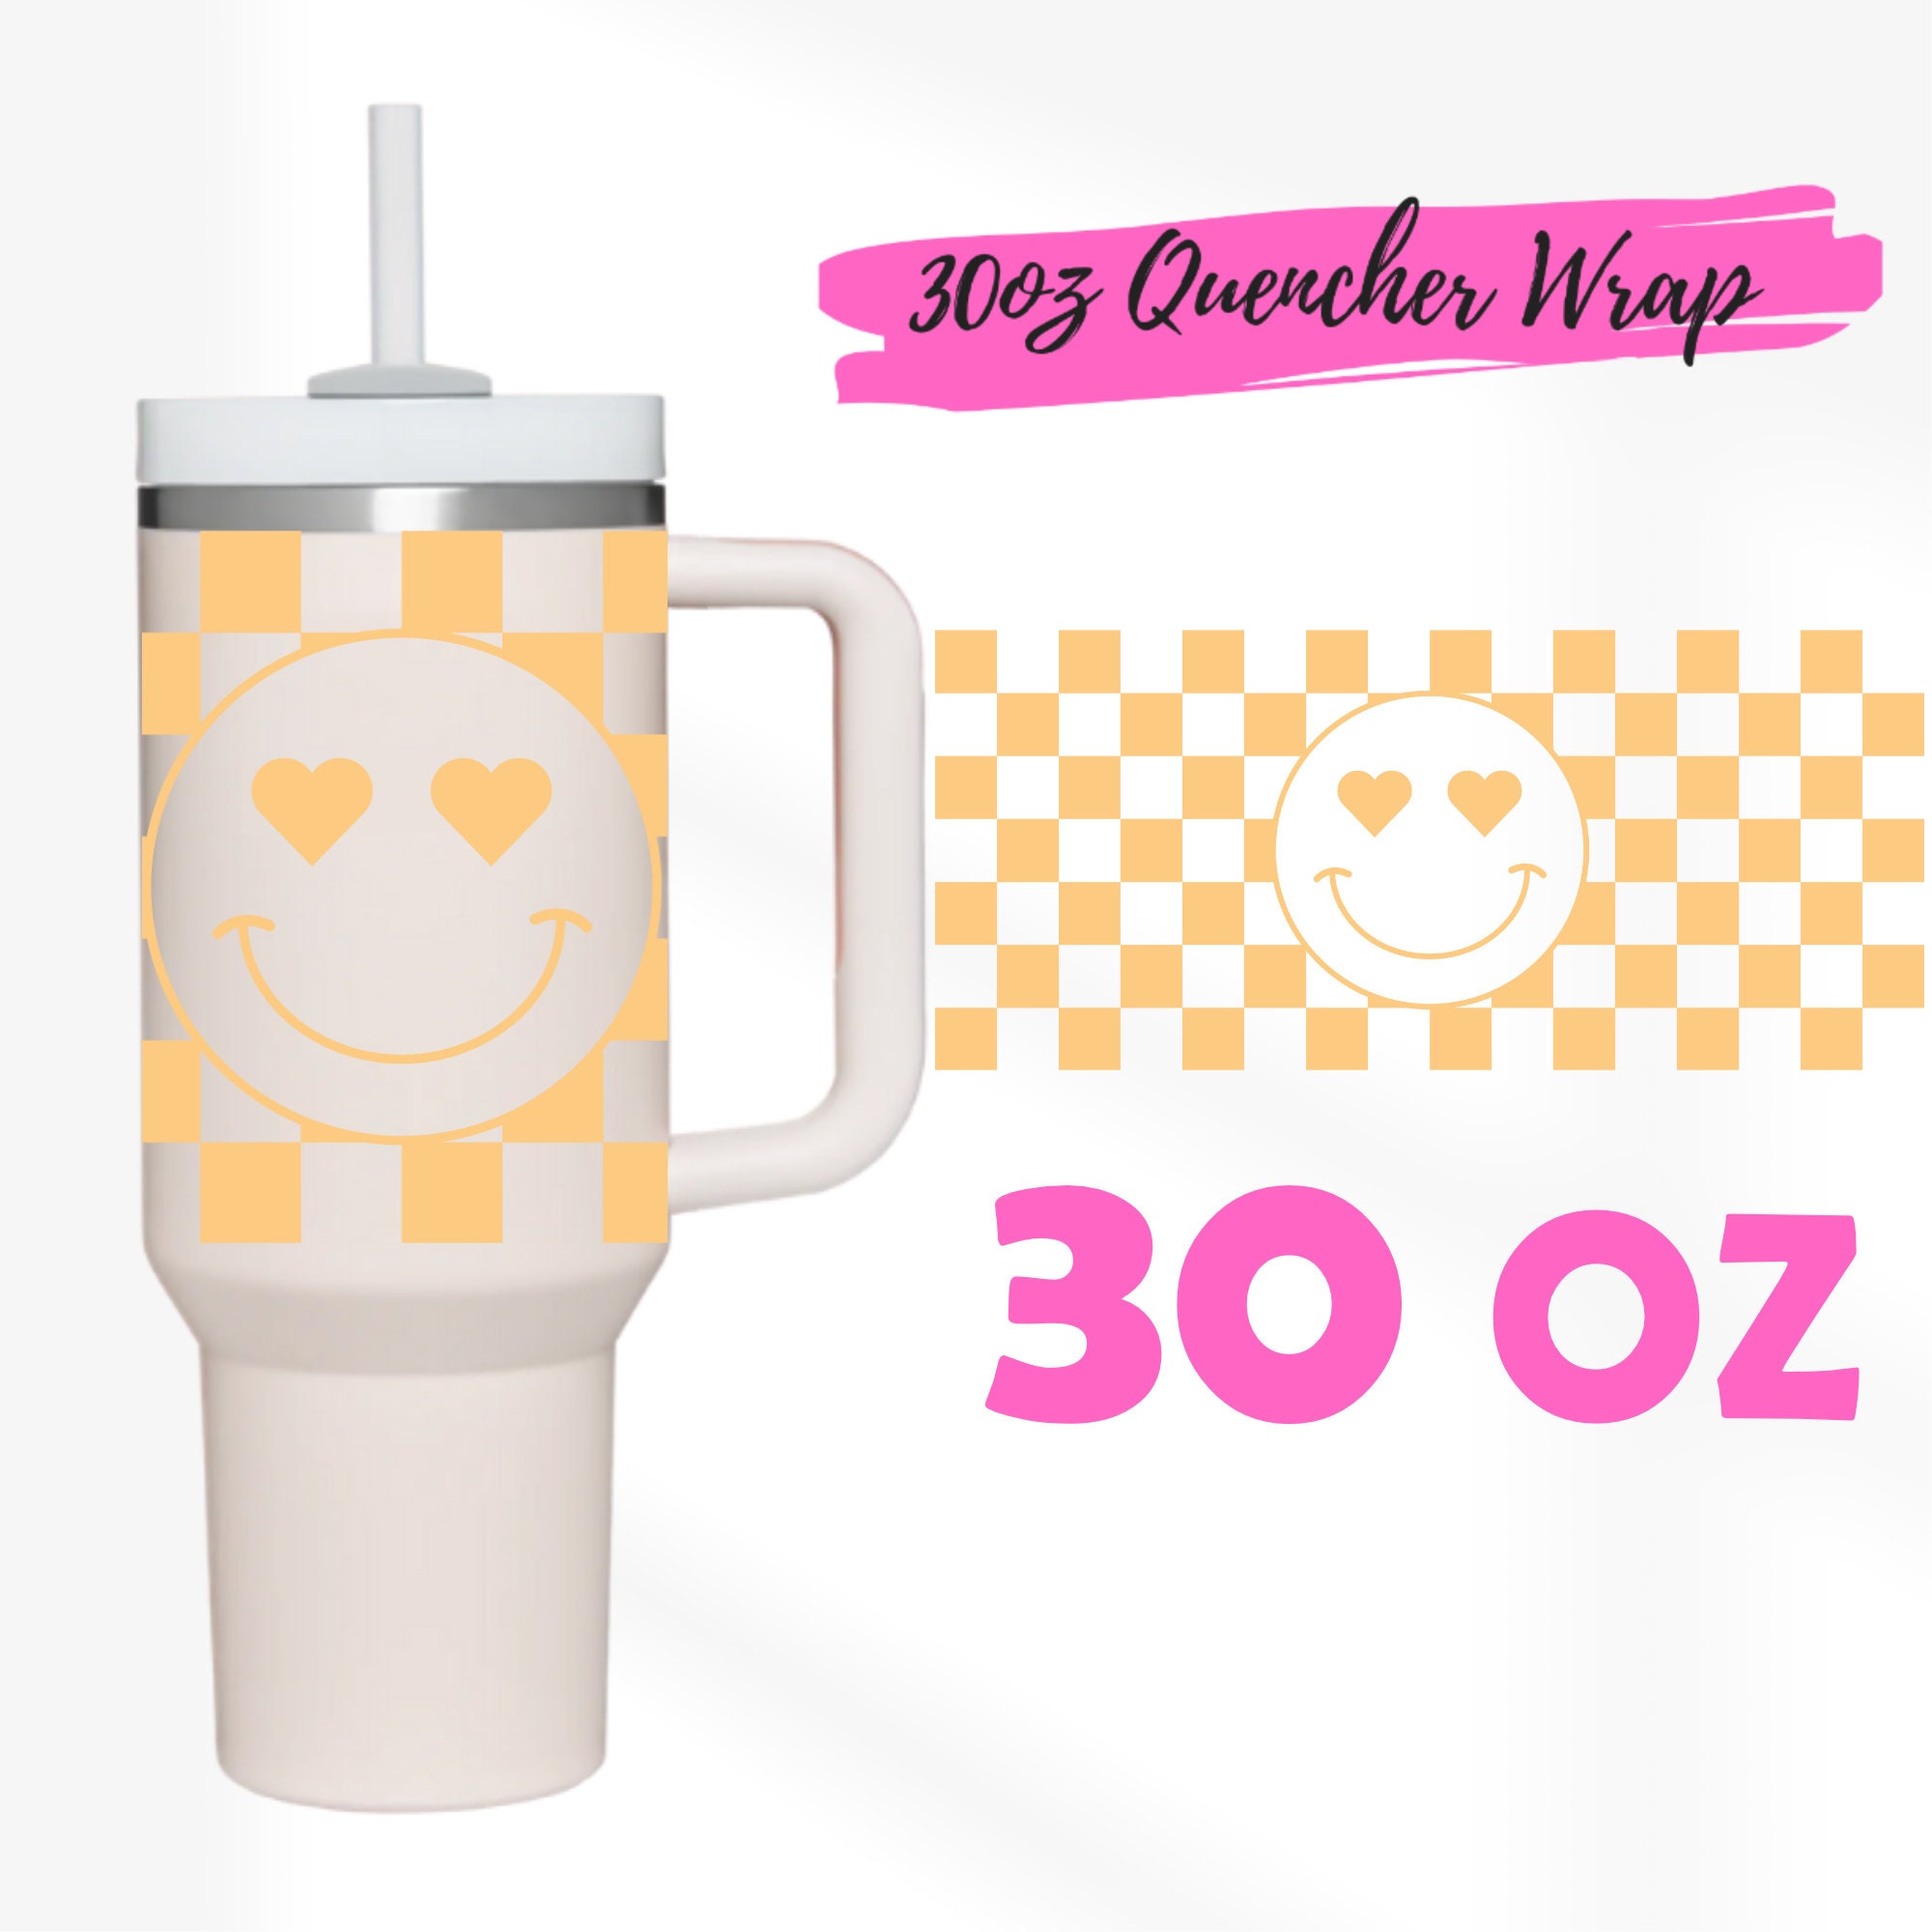 Smiley Sticker 40 Oz Stanley Tumbler Graphic by SparkyDesignsUS